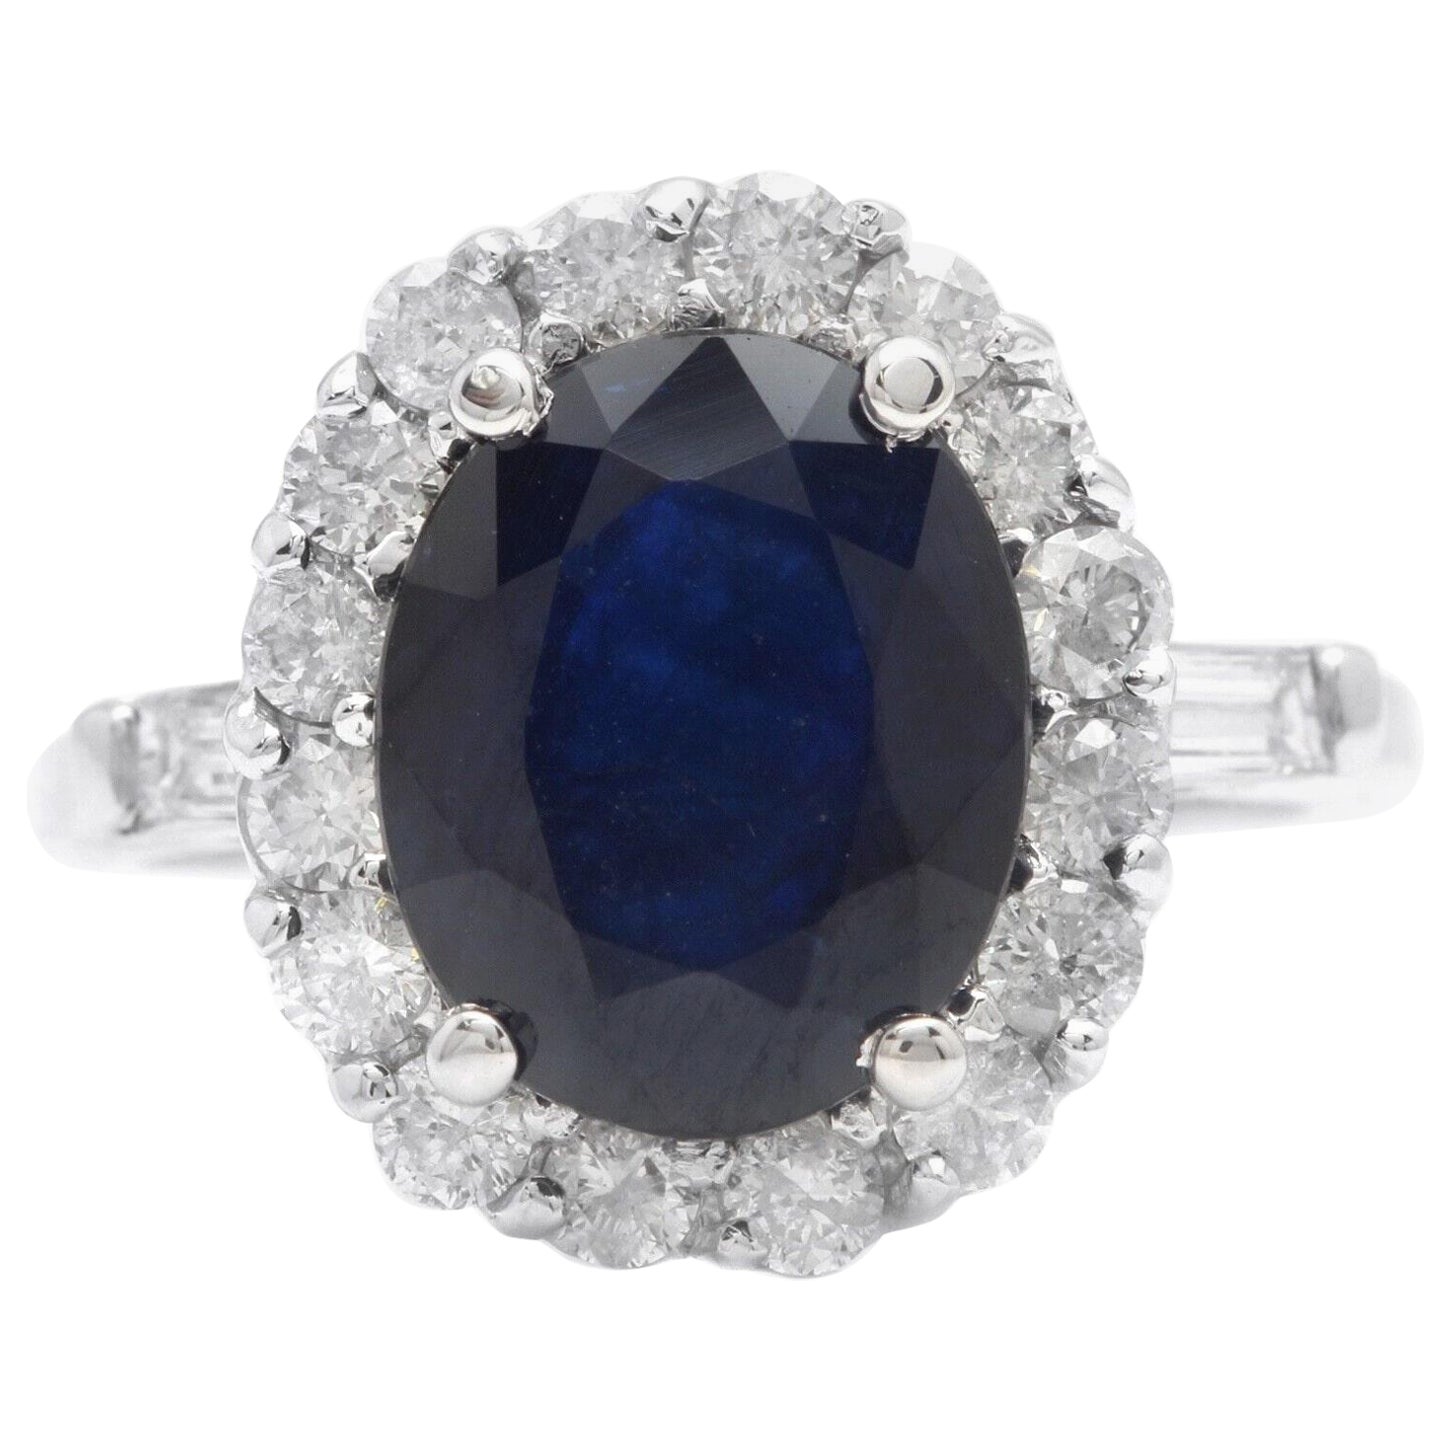 4.85 Ct Exquisite Natural Blue Sapphire and Diamond 14K Solid White Gold Ring